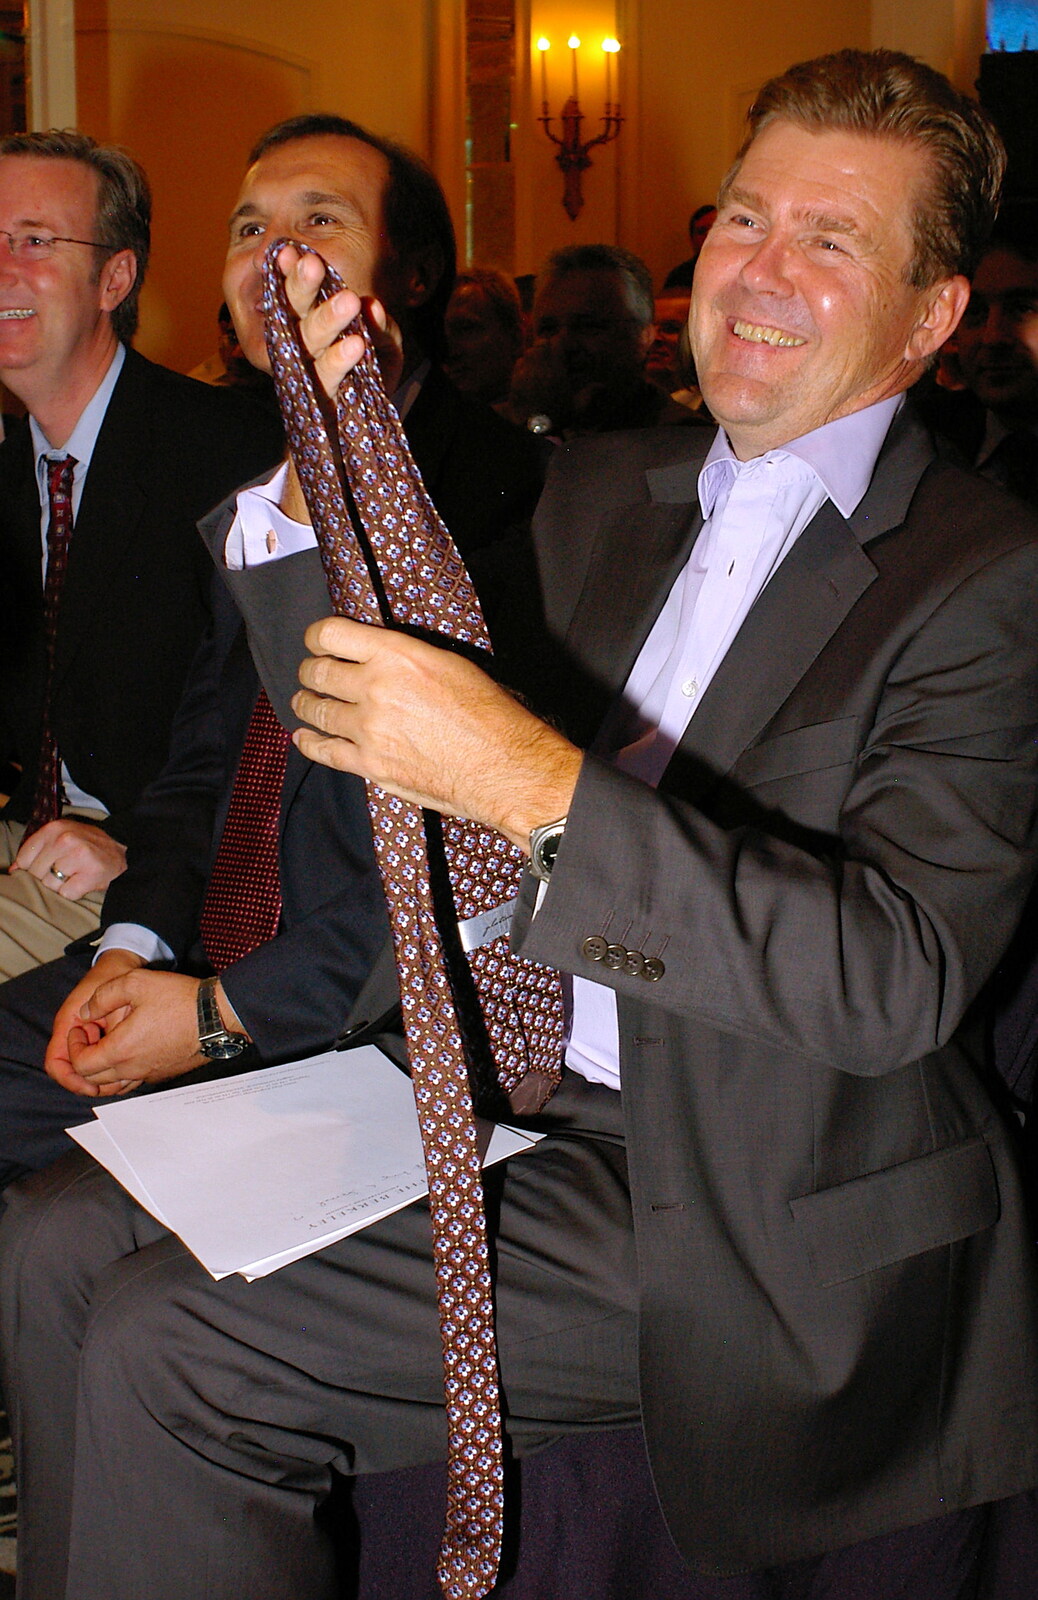 Pertti Johansson gets his tie off too from Qualcomm Europe All-Hands at the Berkeley Hotel, London - 9th November 2005